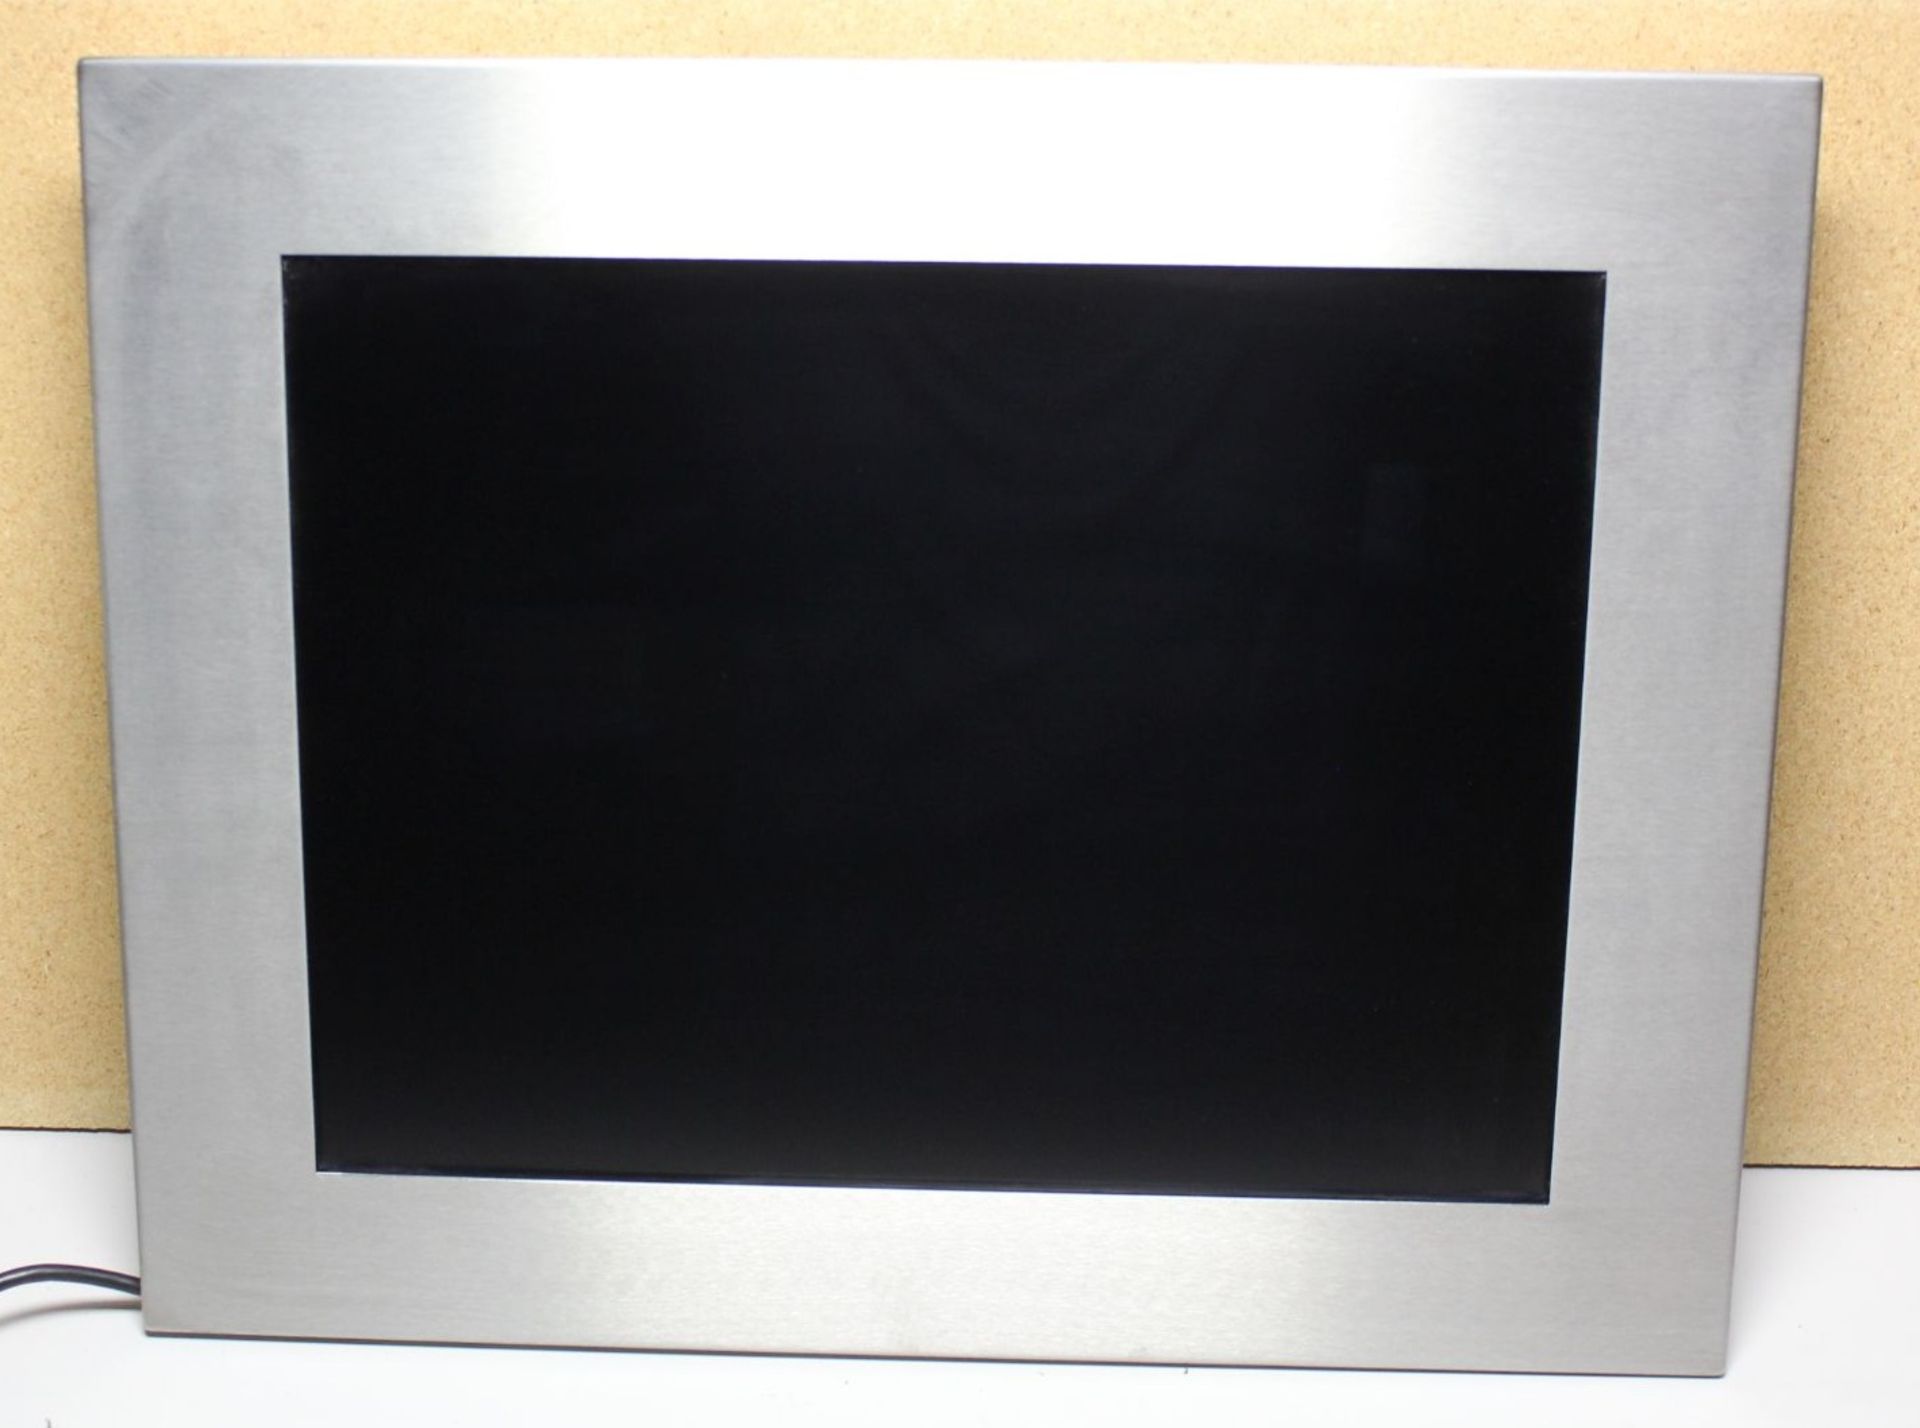 HOPE INDUSTRIAL 20" INDUSTRIAL MONITOR AND TOUCH SCREEN HMI